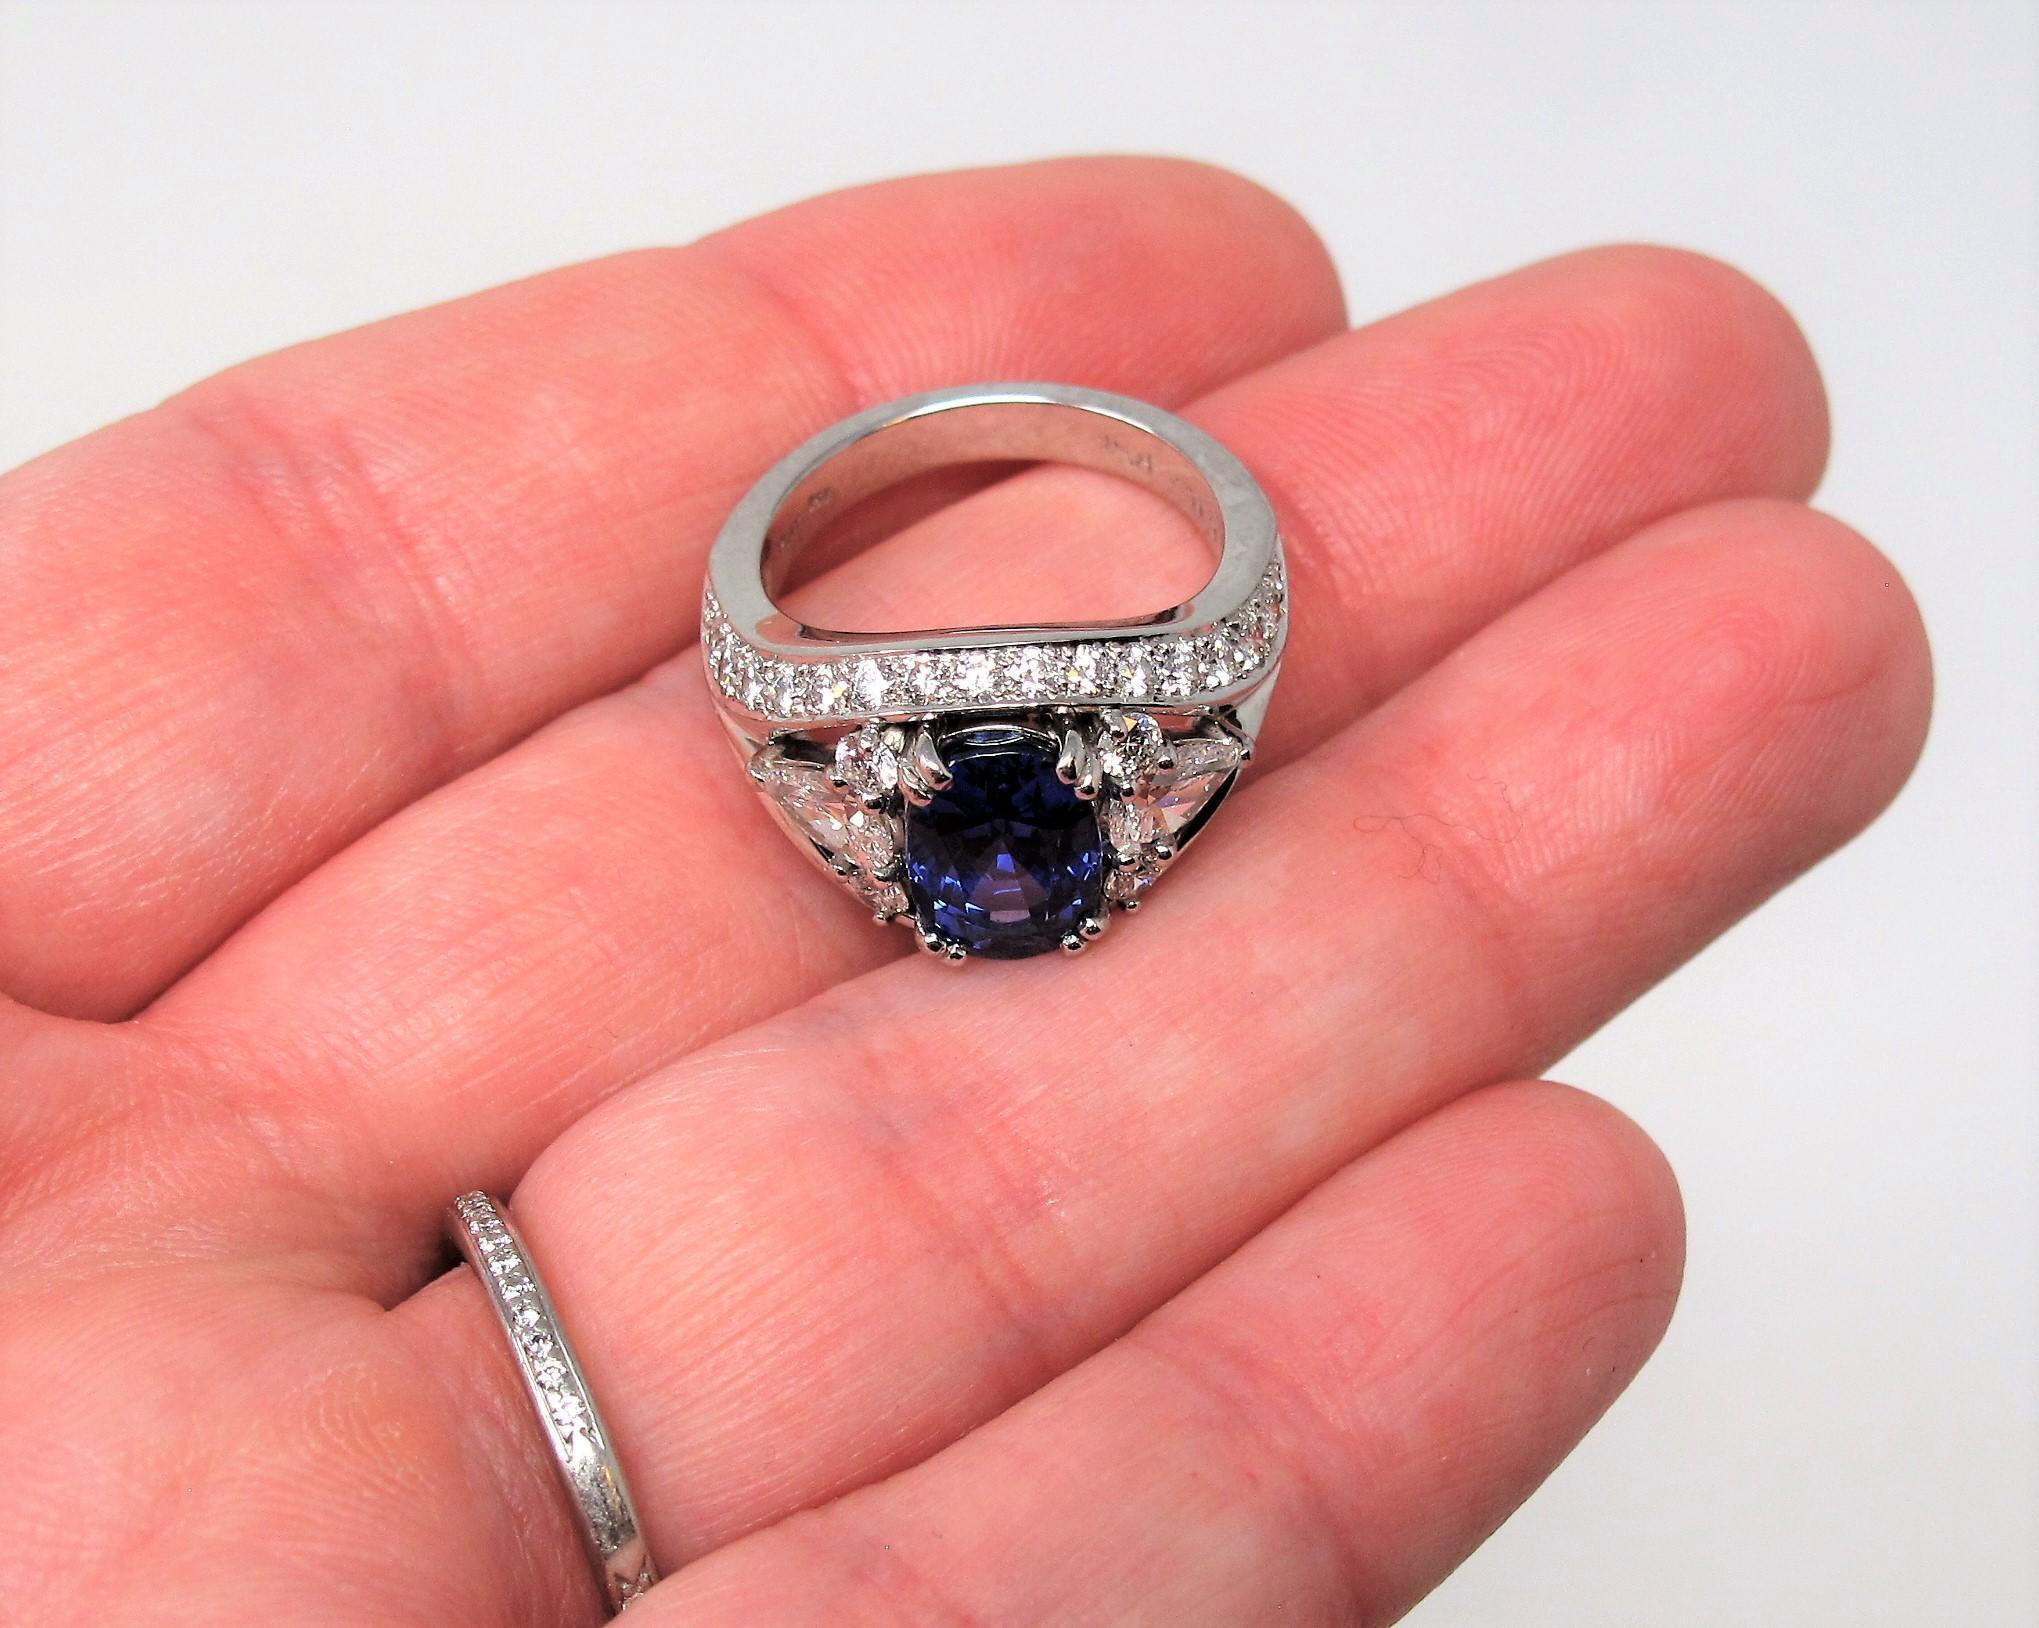 Women's 3.10 Carat Untreated Oval Mixed Cut Sapphire and Diamond Ring in Platinum For Sale